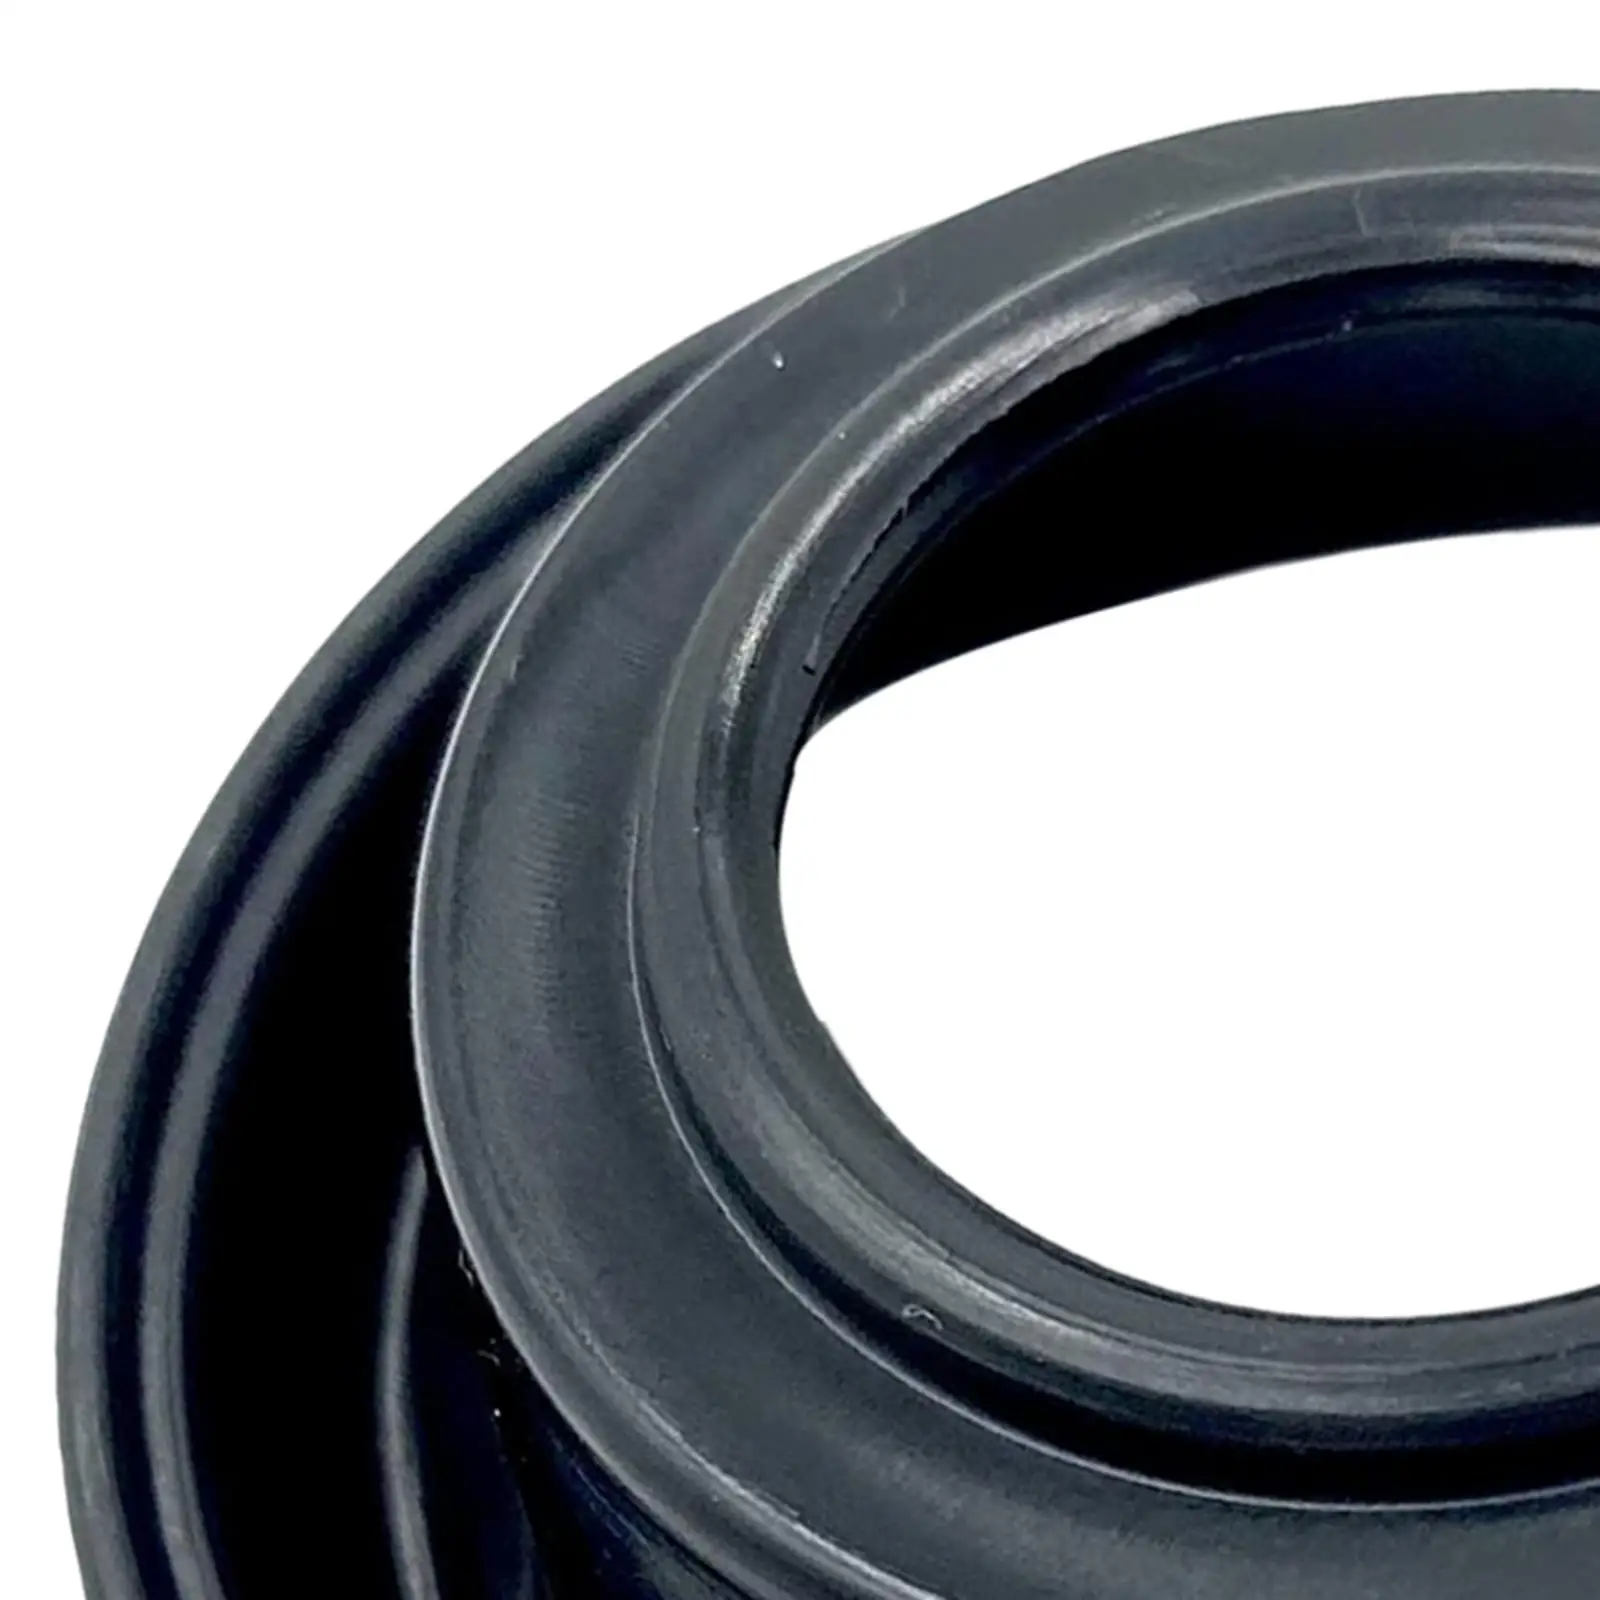 Diaphragm Rubber 3130910 Replacement Fits for 500 Worker